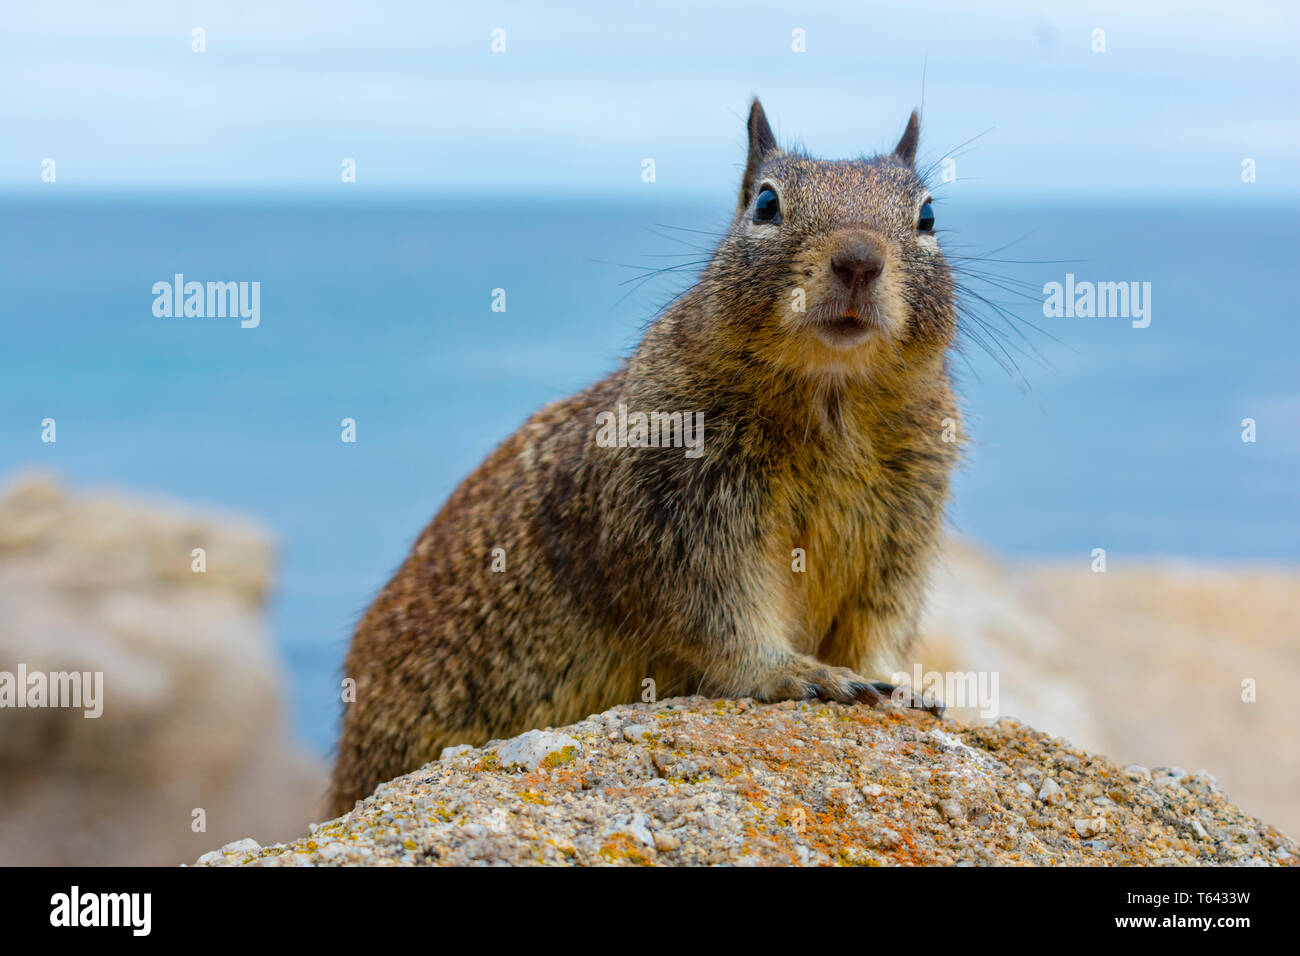 Surprised ground squirrel on colorful coastal rocks with blue ocean water in background. Stock Photo